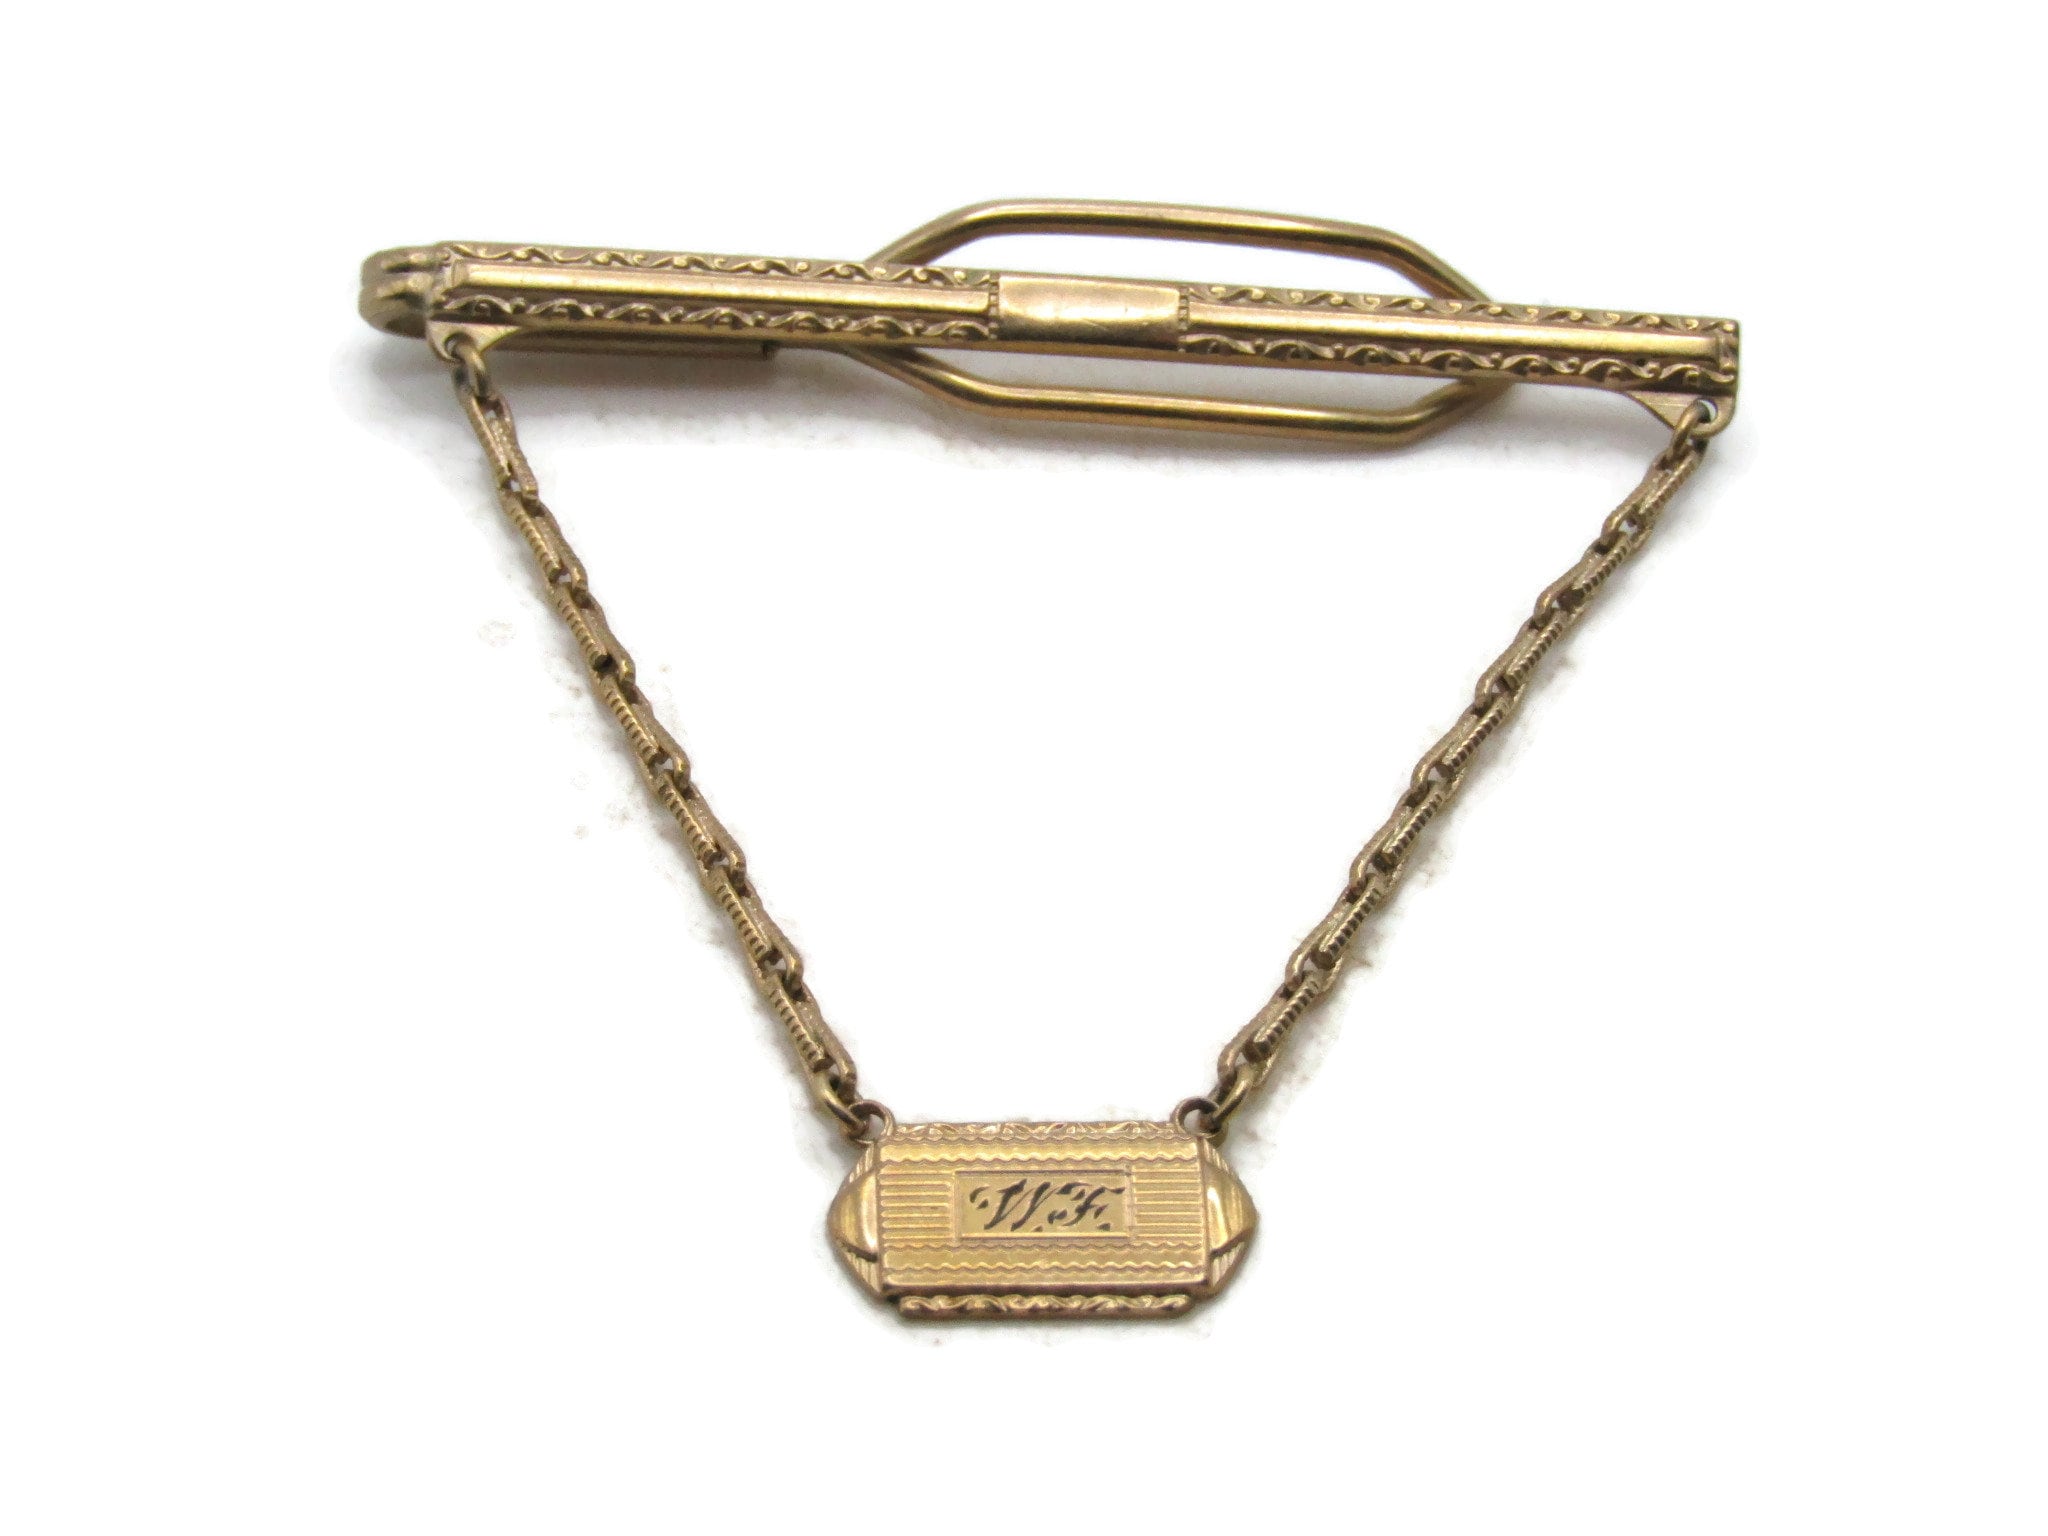 WF Letter Initial Monogram Charm And Chain Tie CLip Tie Bar Men's Jewelry  Gold Tone